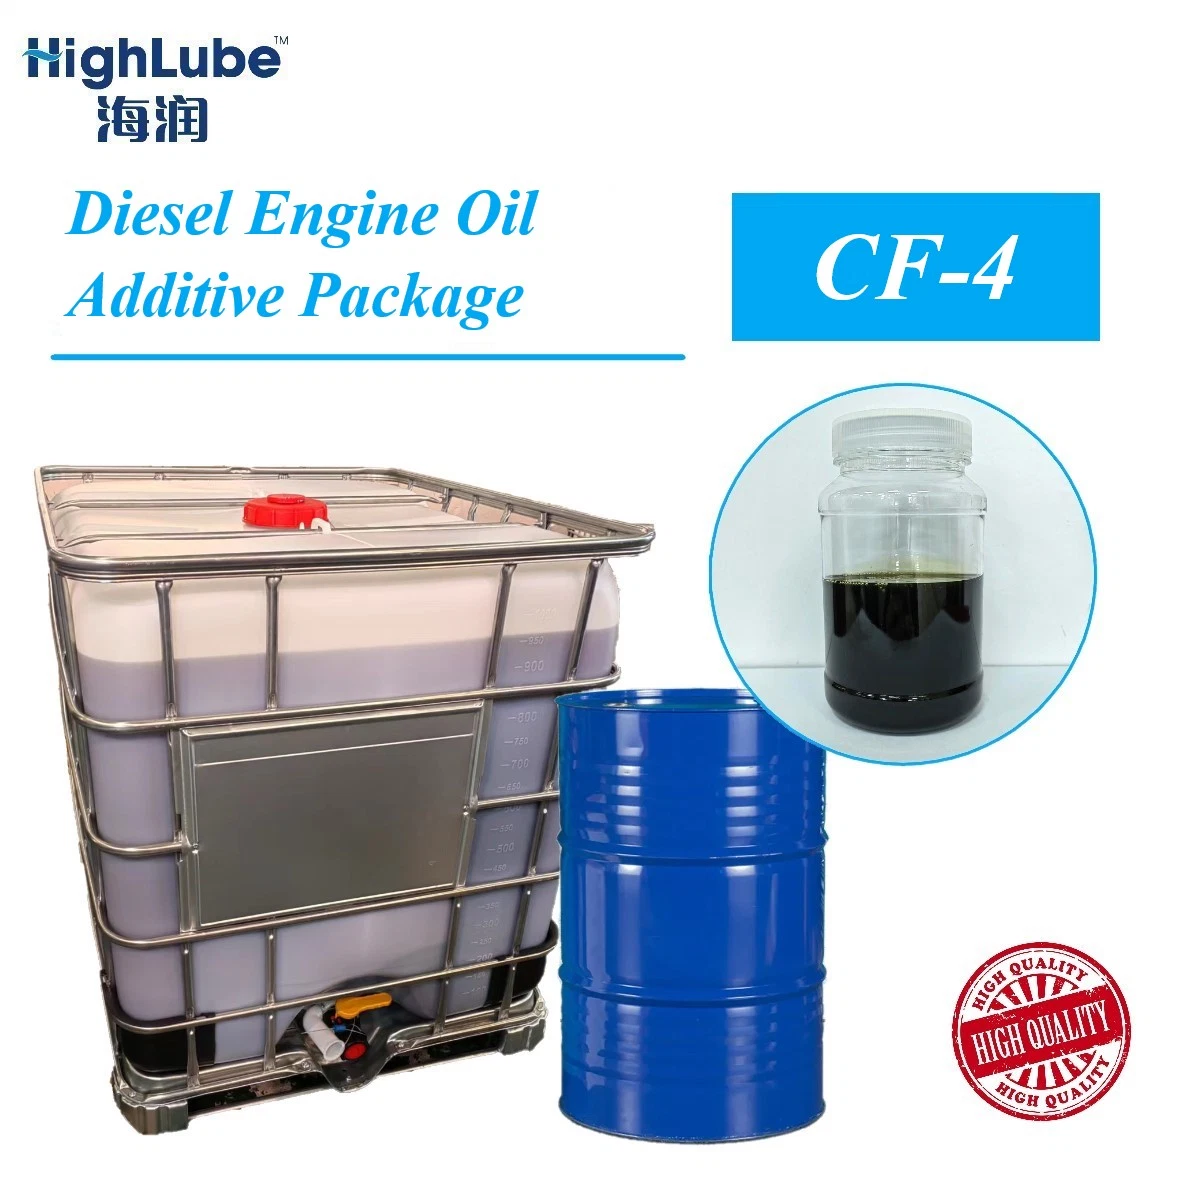 Internel Combustion Engine Oil Package, API CF-4 Lubricant Additive